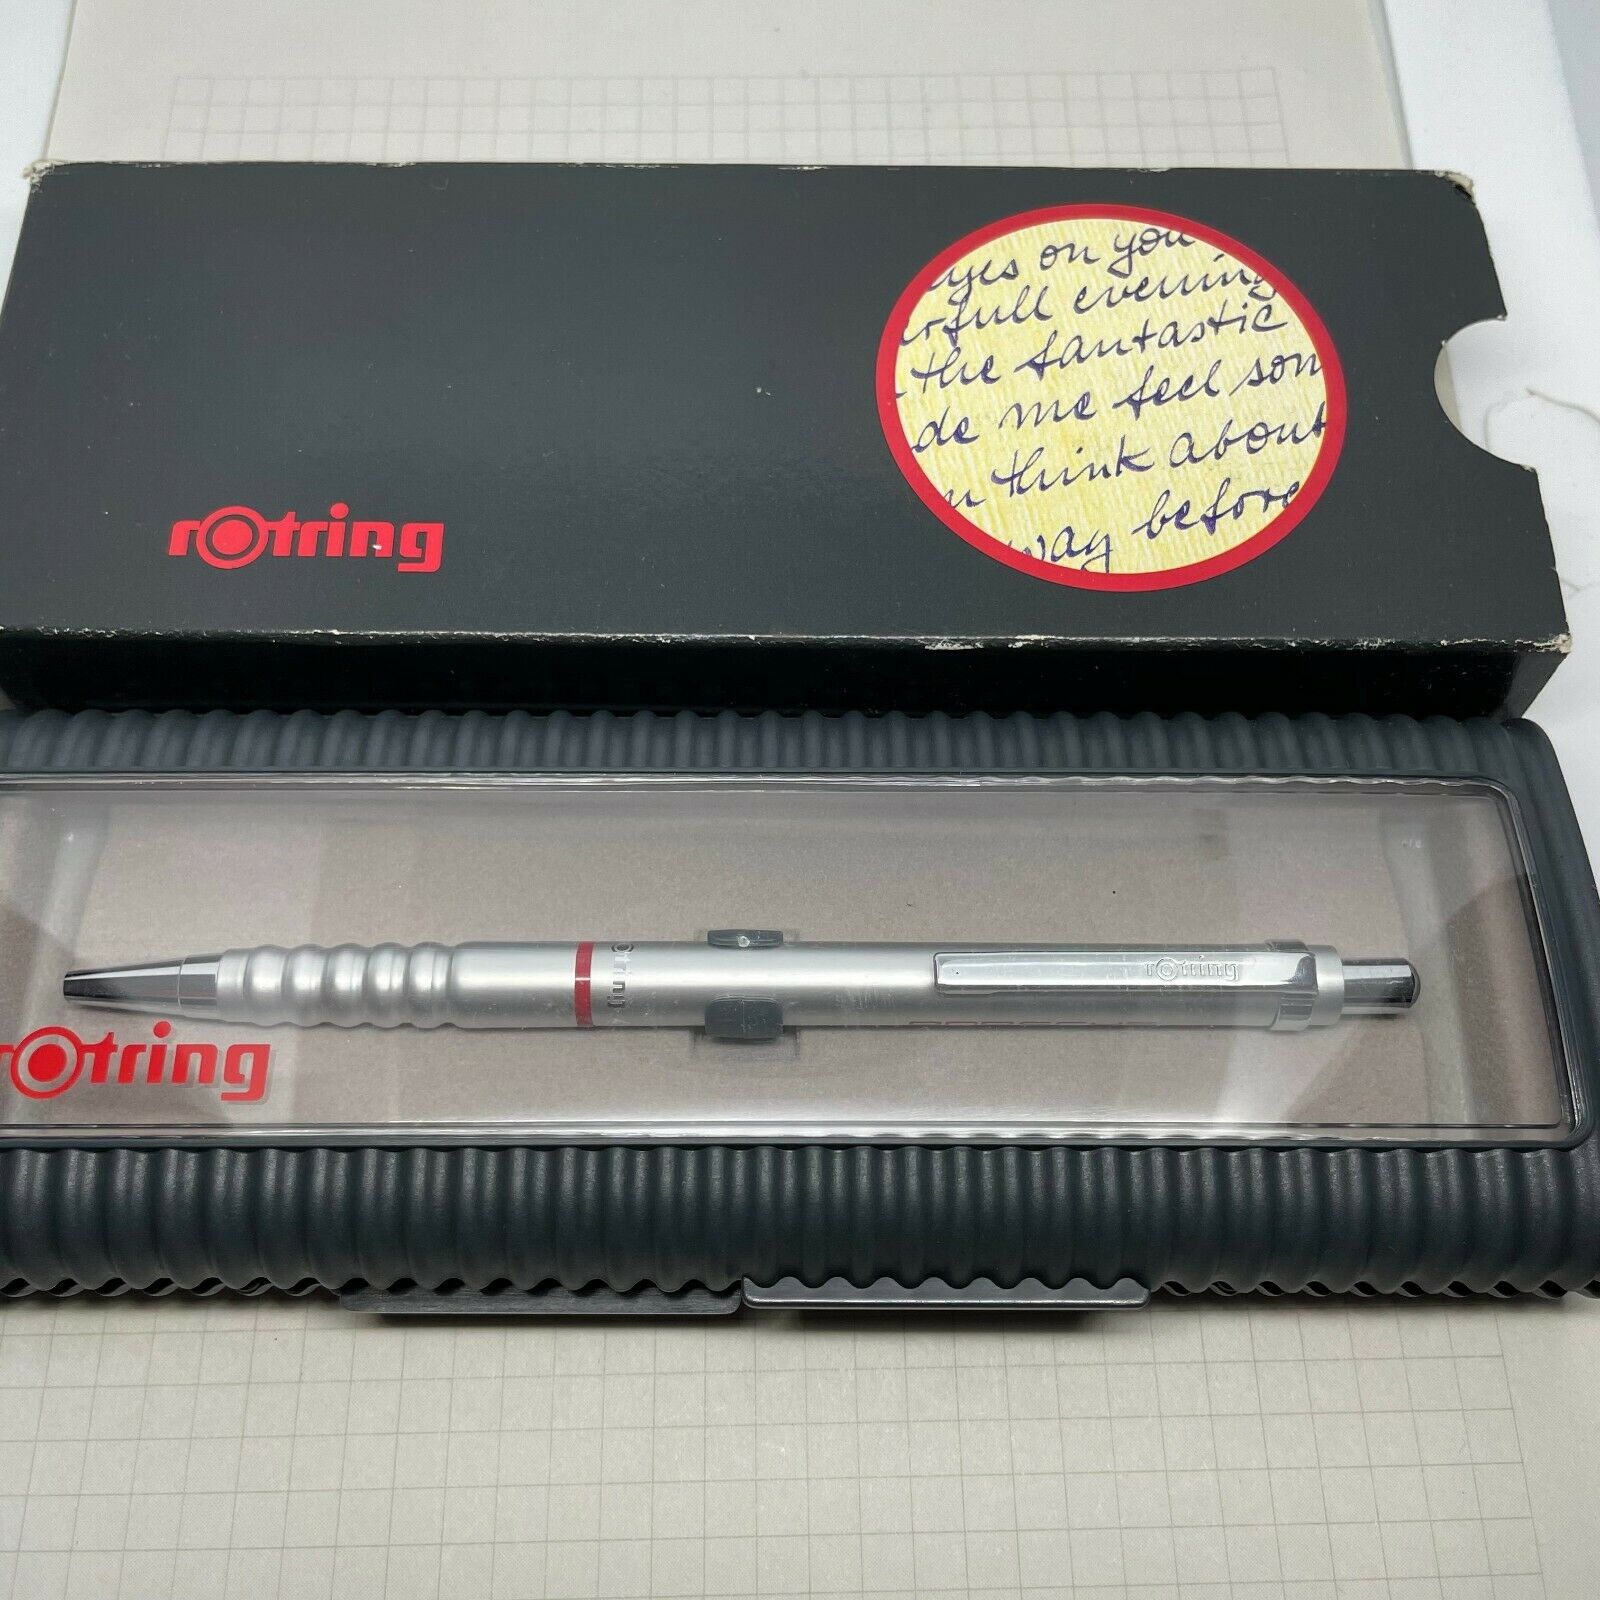 6086 Rotring 400 Ballpoint Pen Silver Color Barrel Nos Made In Germany